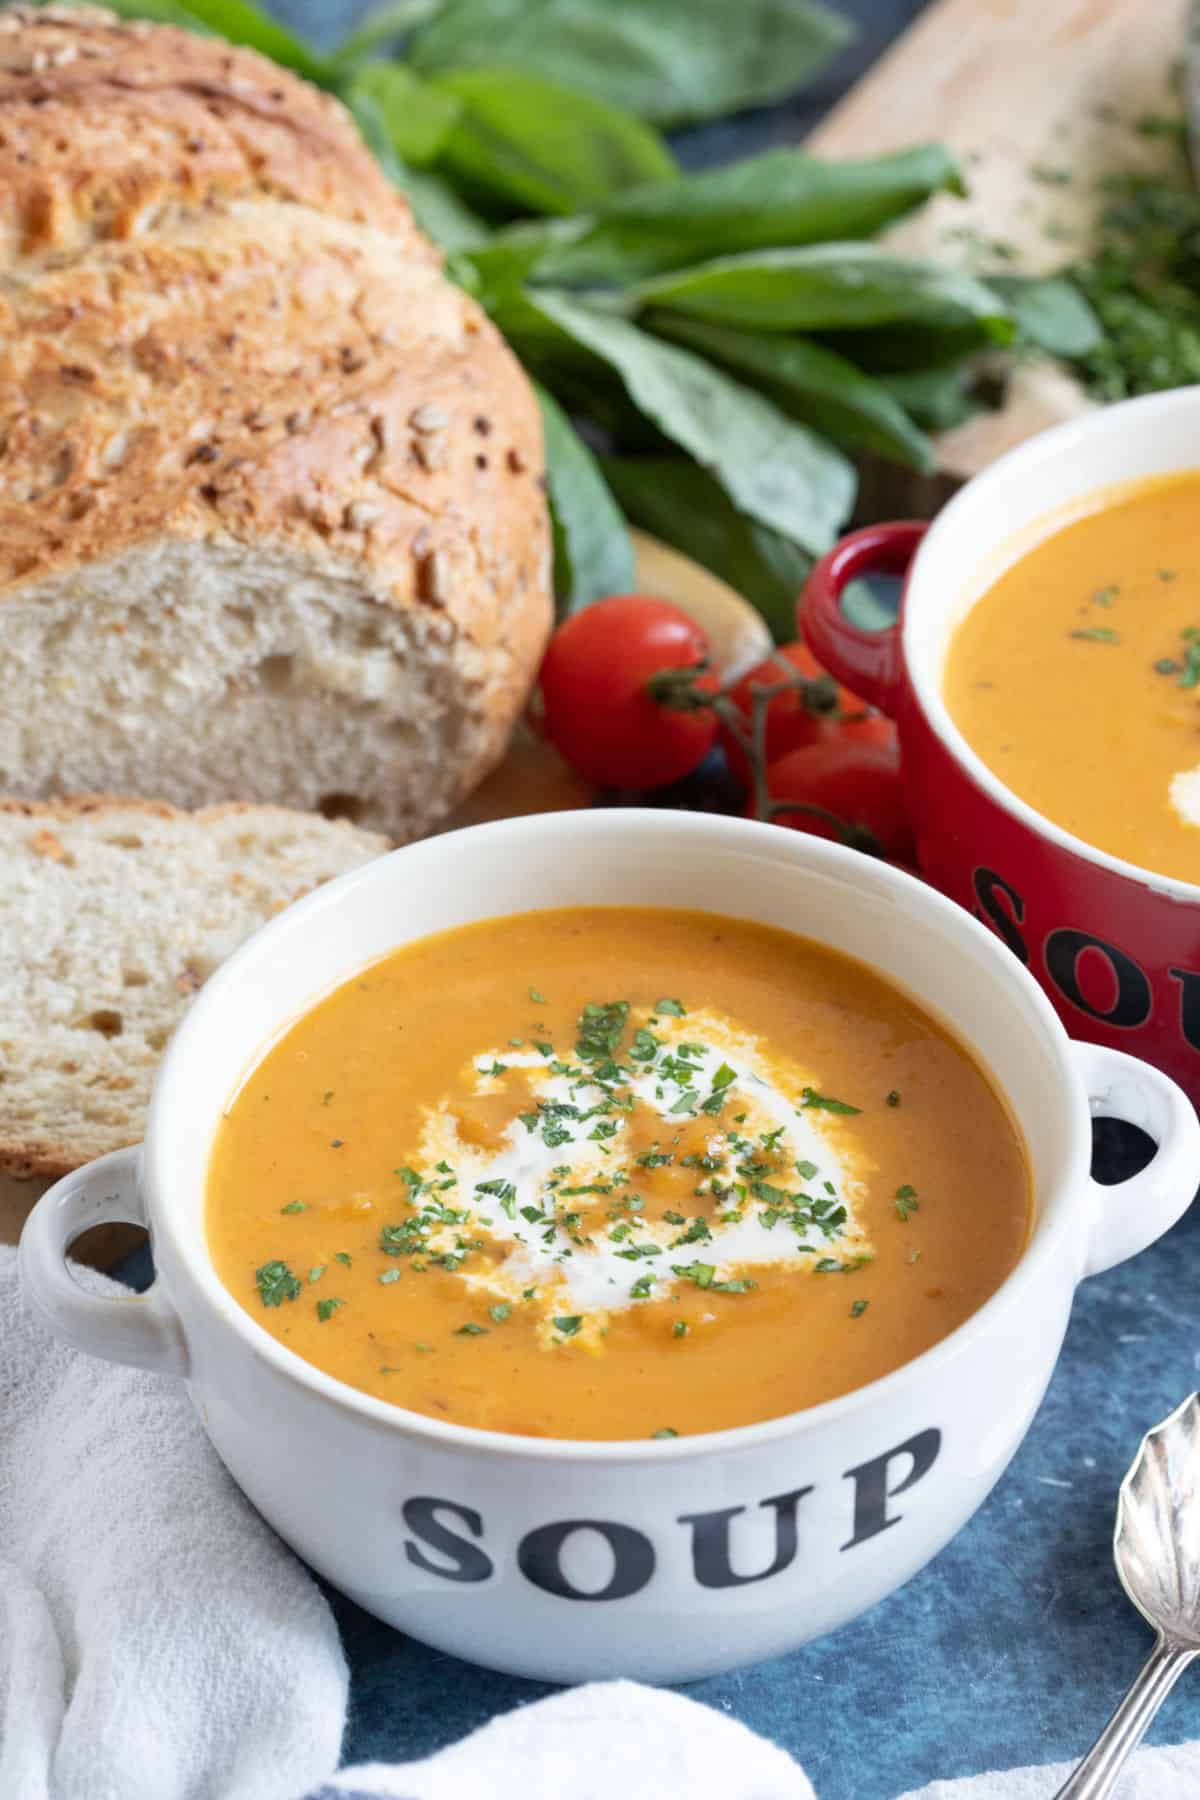 Roasted swede soup in a soup bowl with bread.